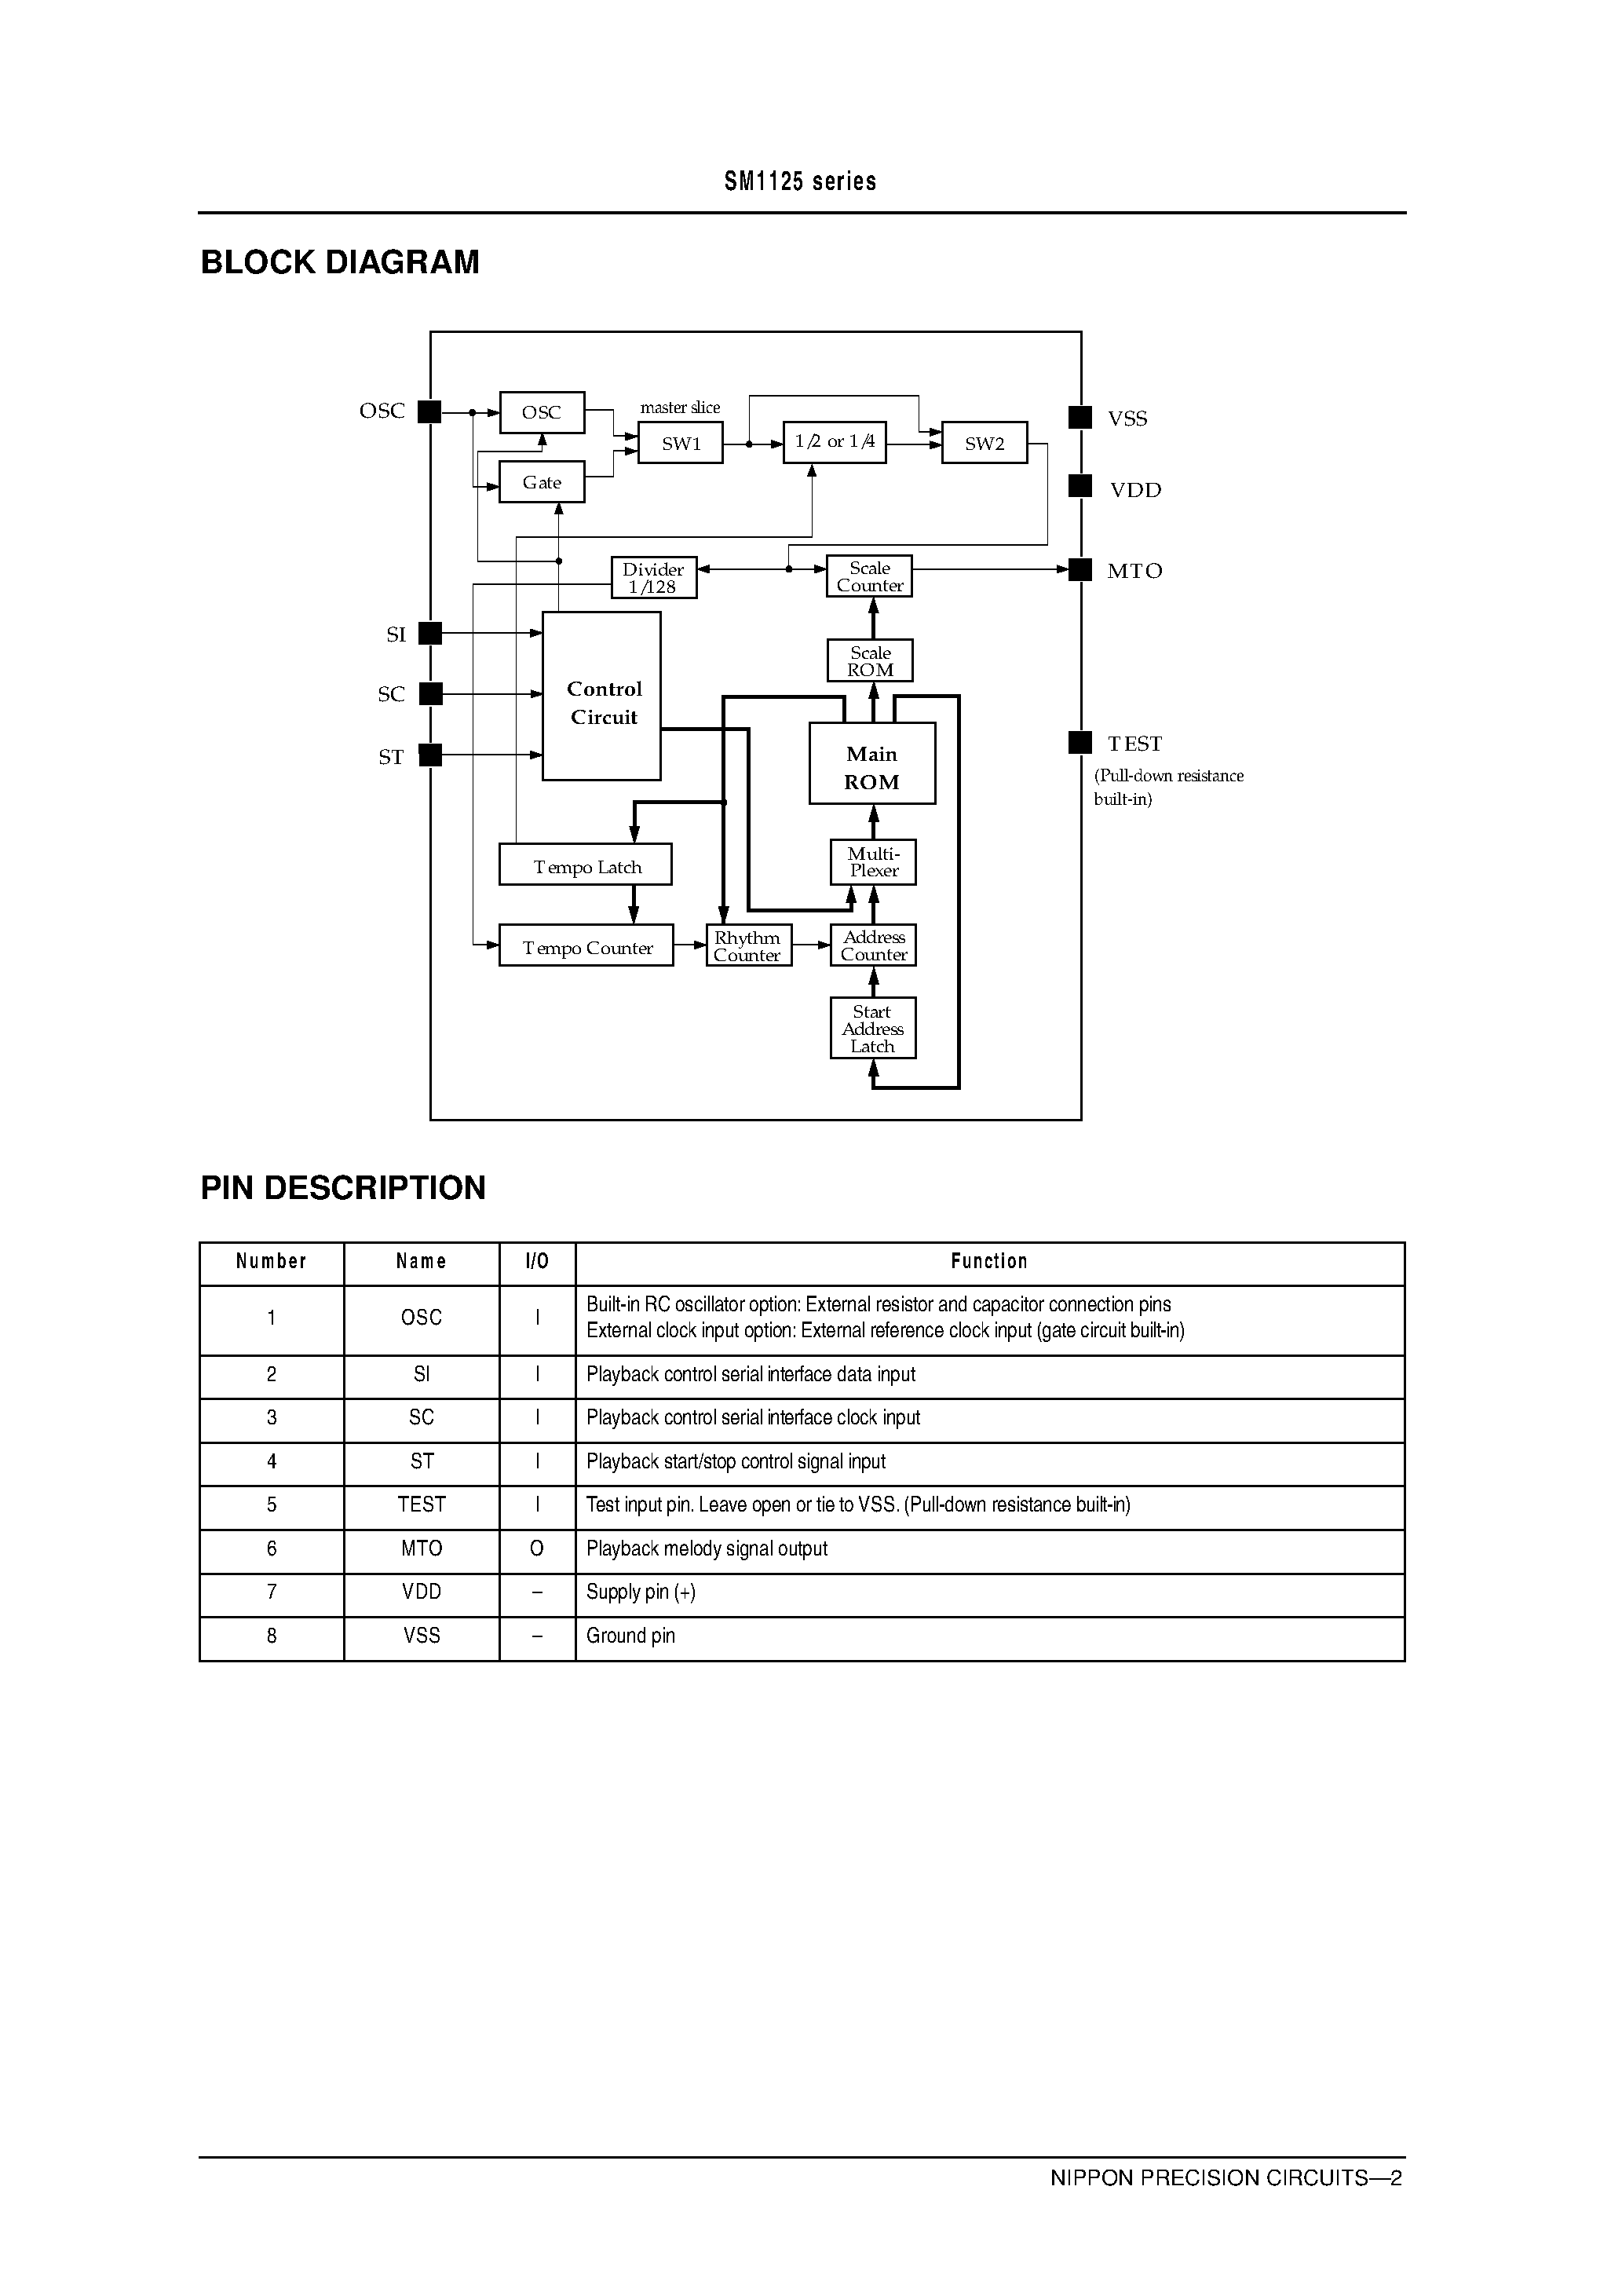 Datasheet SM1125 - Multimelody IC for Pagers page 2